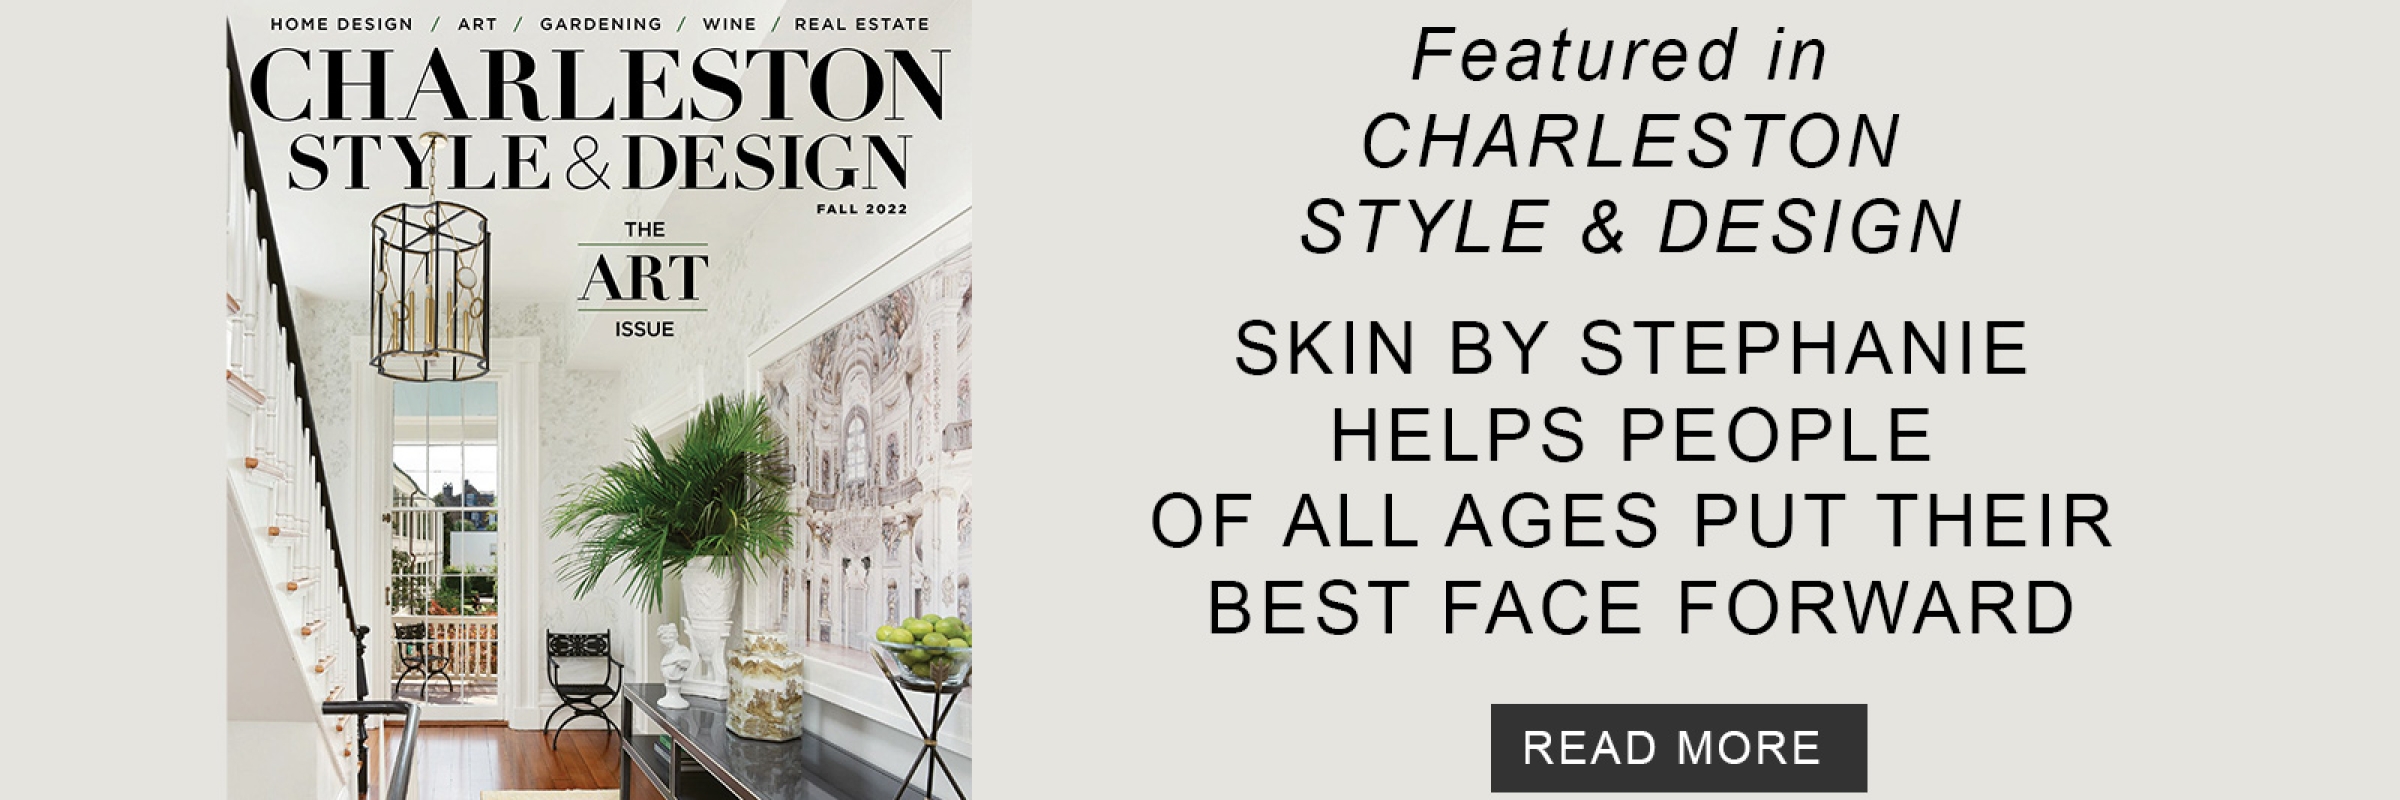 aesthetician-Charleston-Design-and-Style